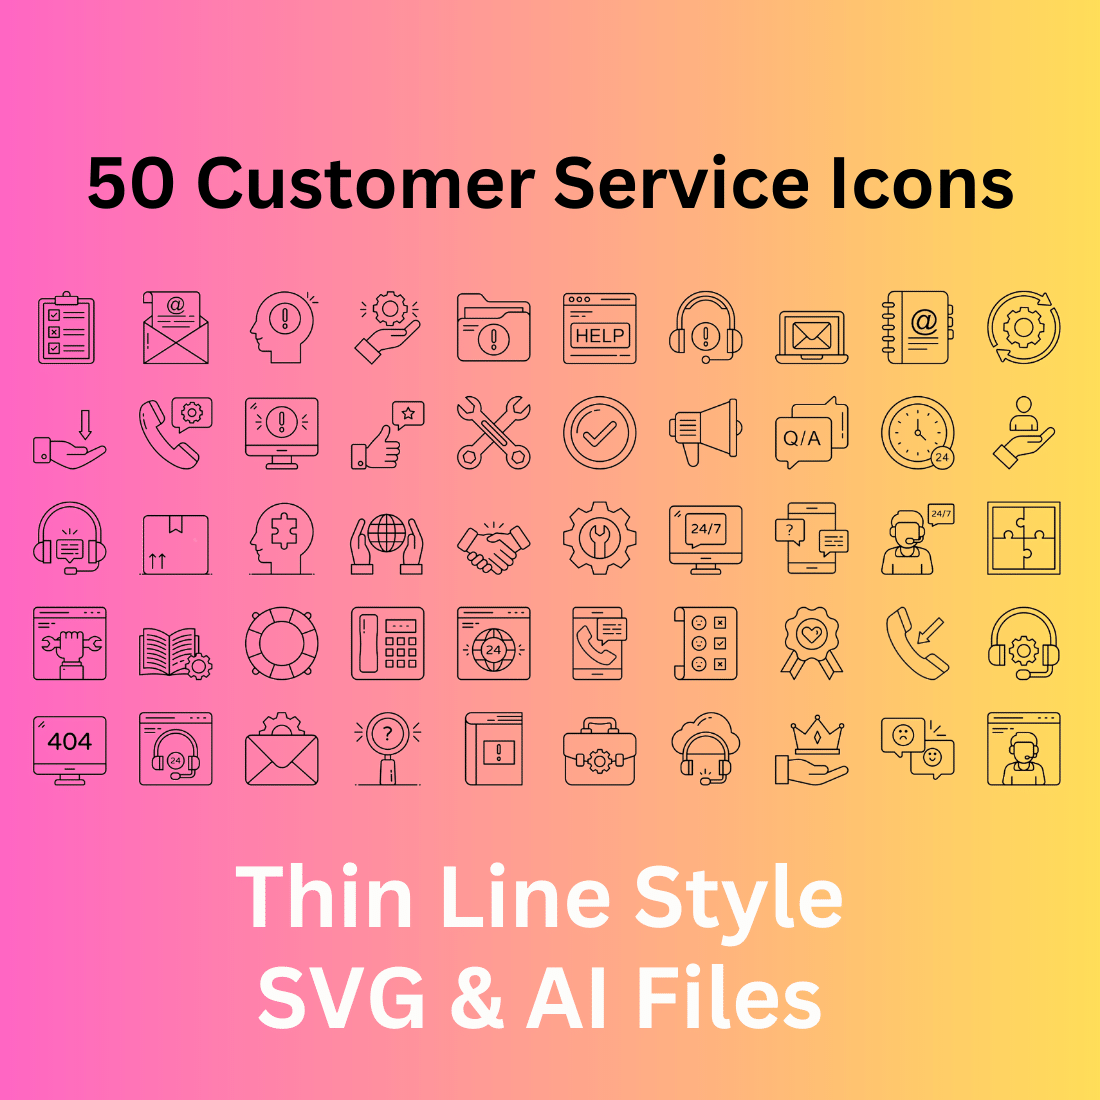 Customer Service Icon Set 50 Outline Icons - SVG And AI Files cover image.